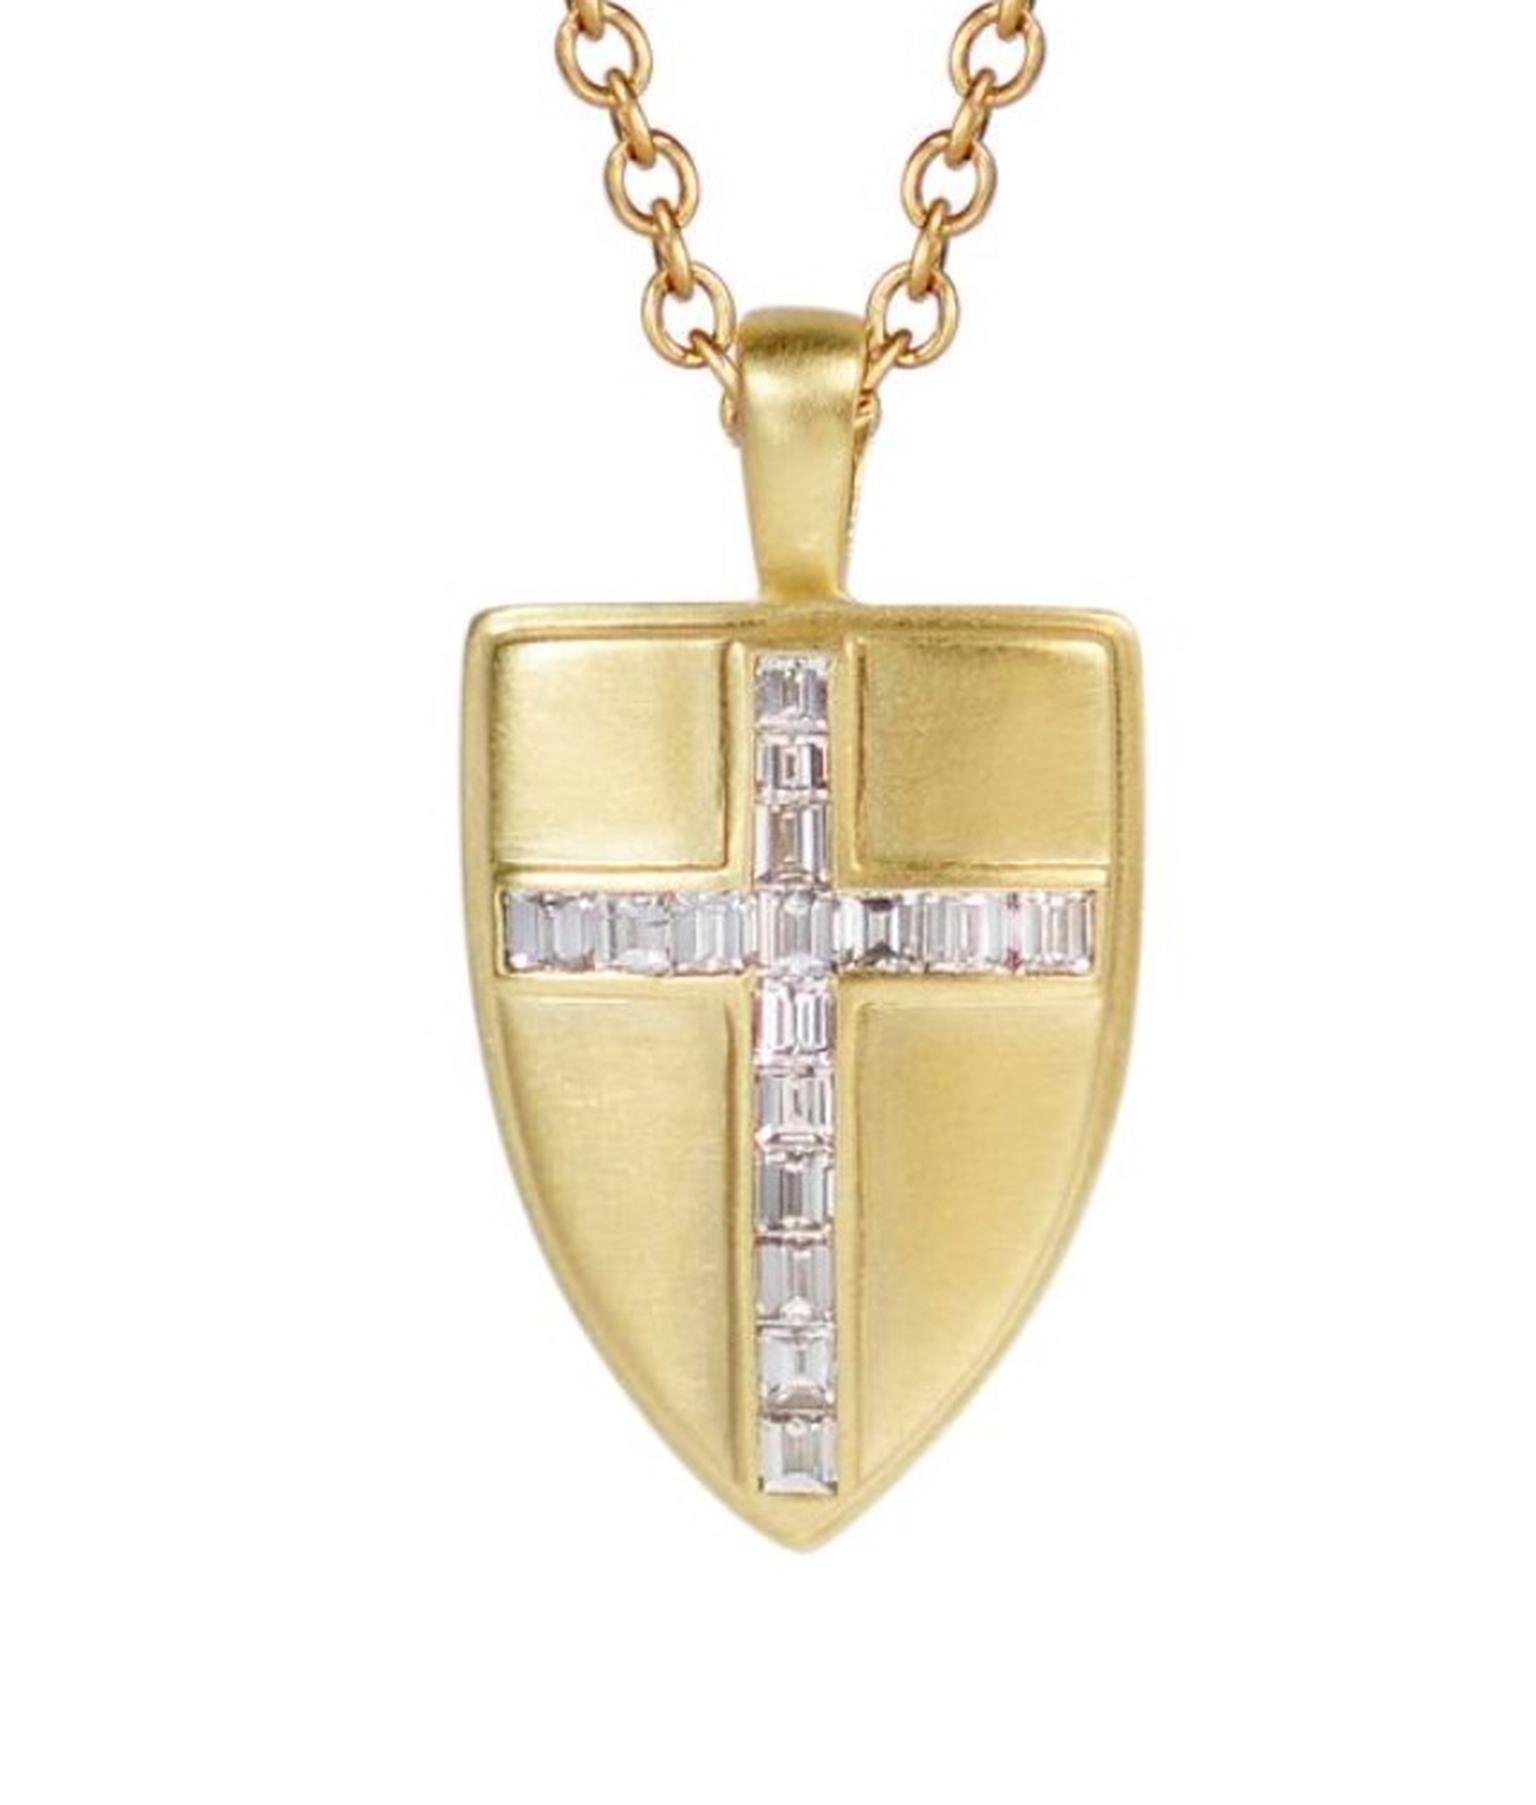 Me & Ro gold shield pendant with diamonds, available to buy with the Spring app.